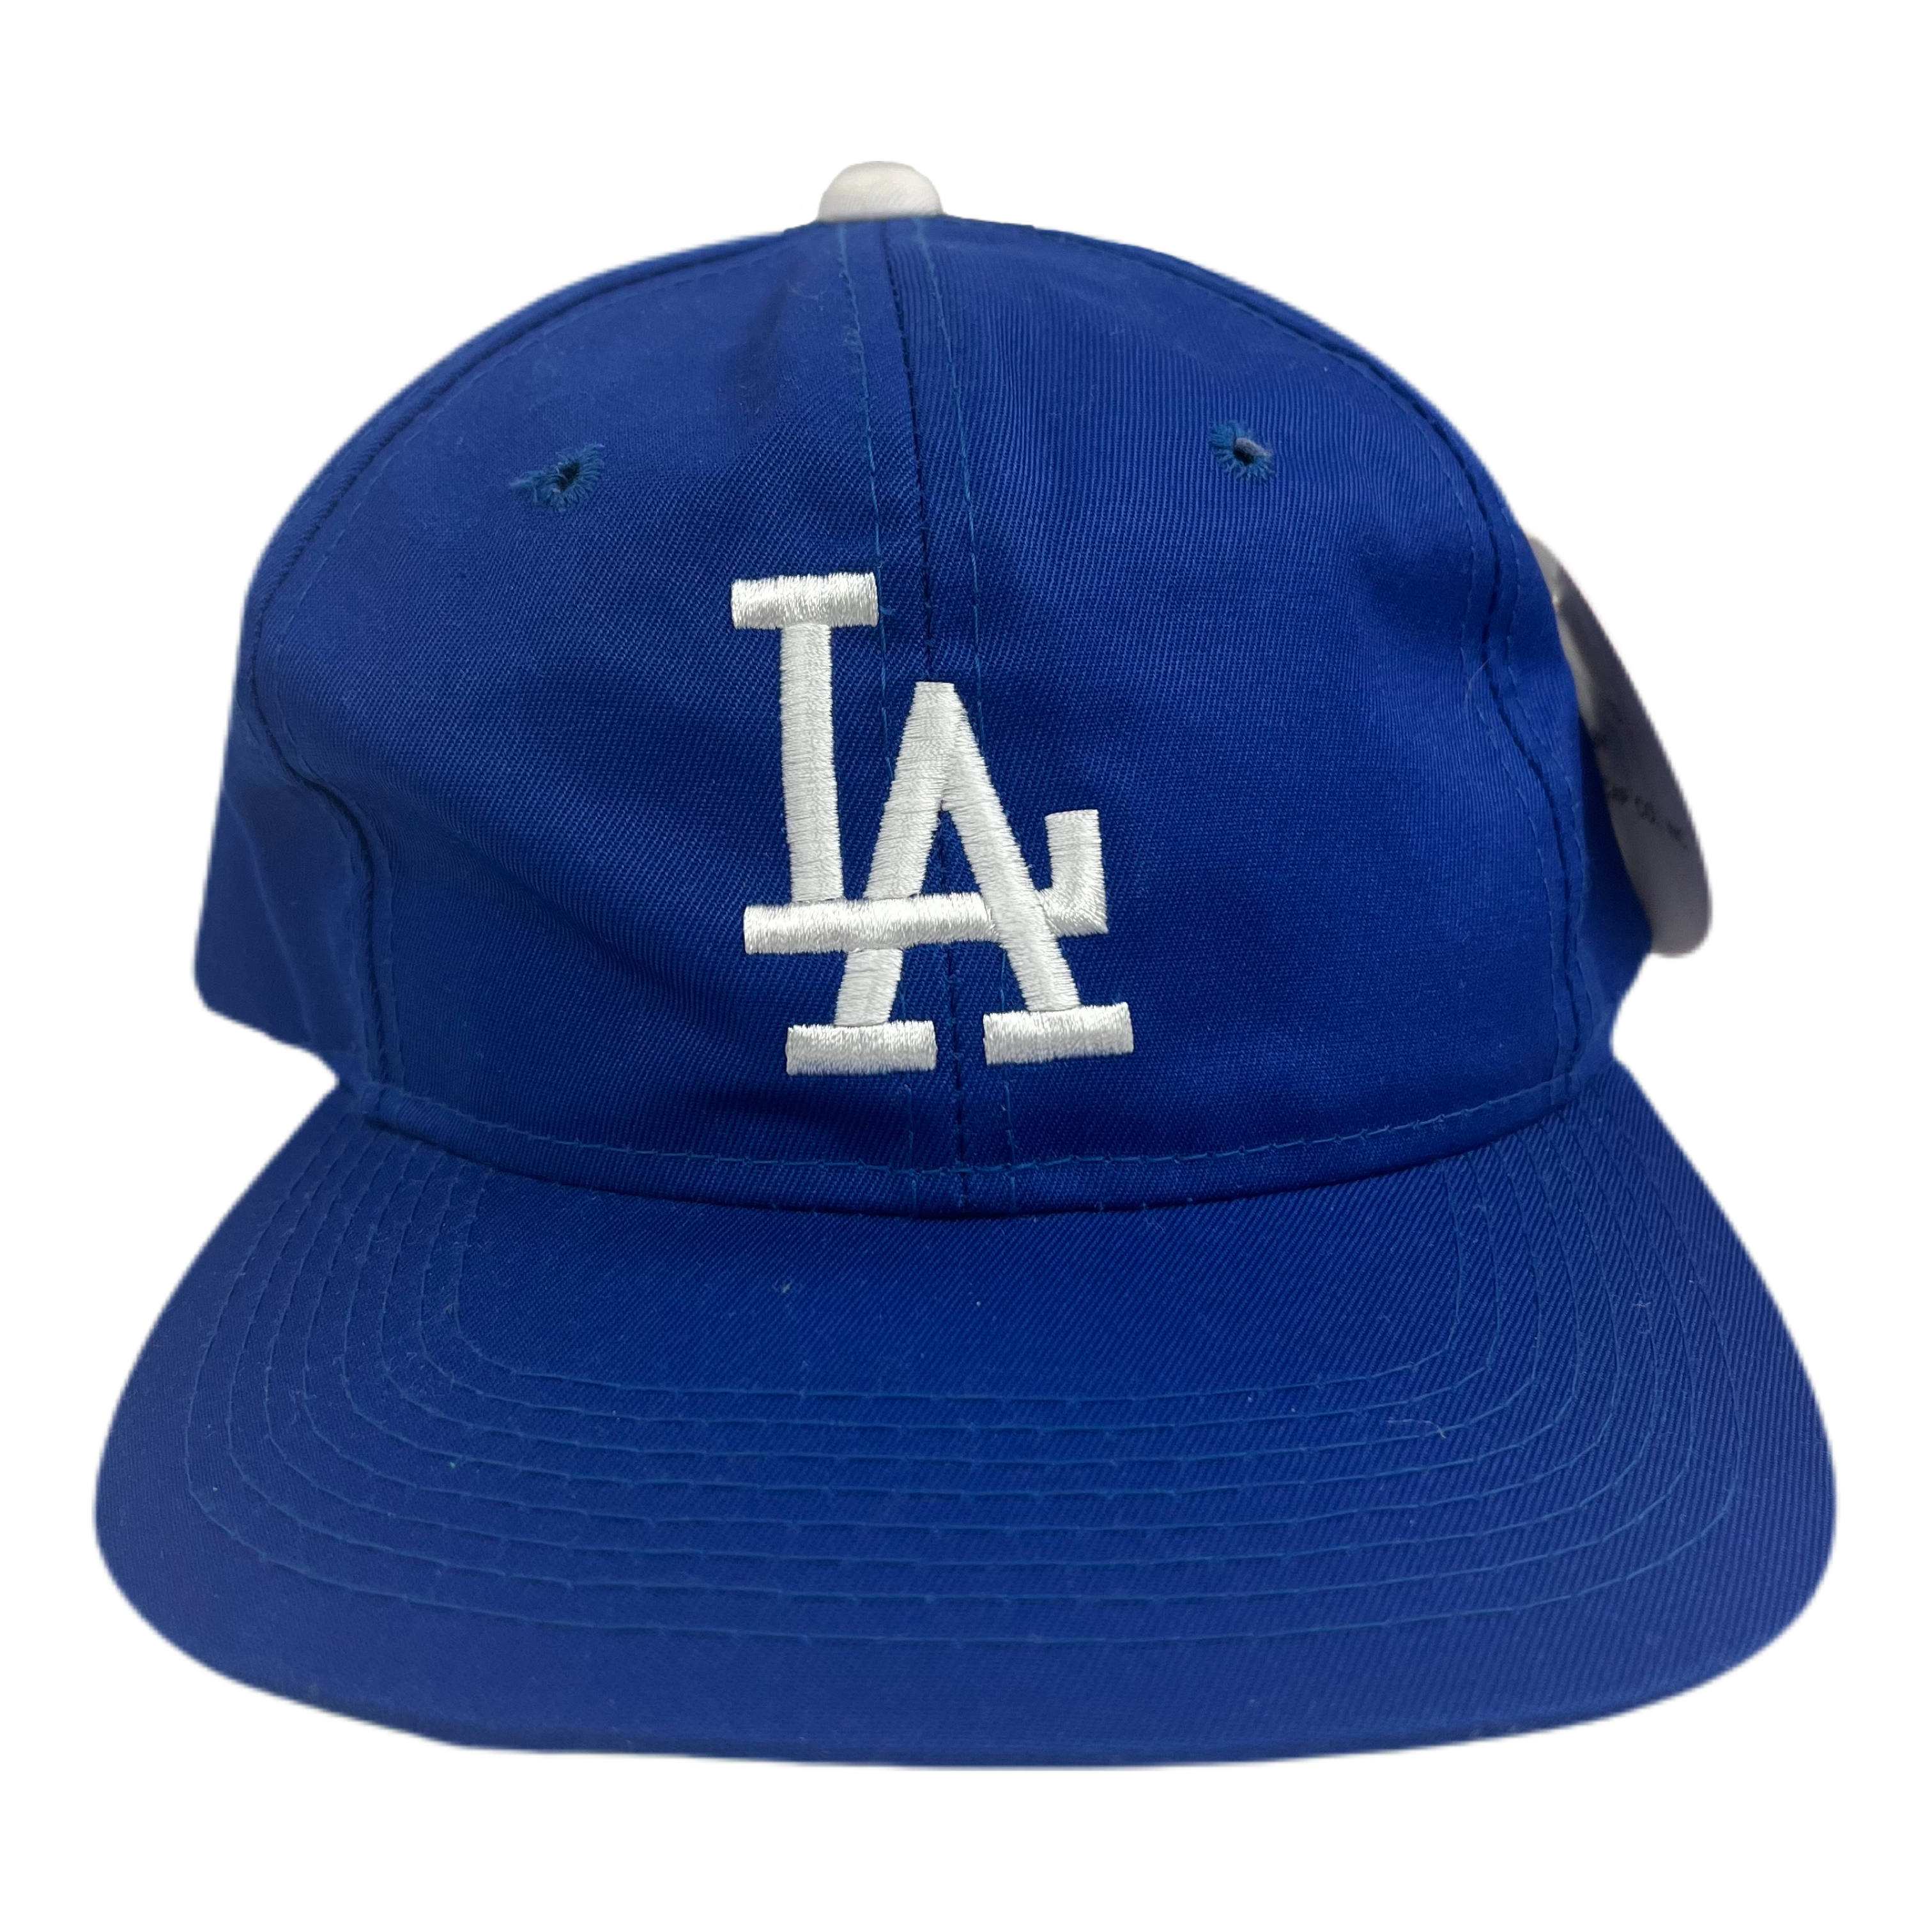 Los Angeles Dodgers merchandise, clothing, and more, for opening